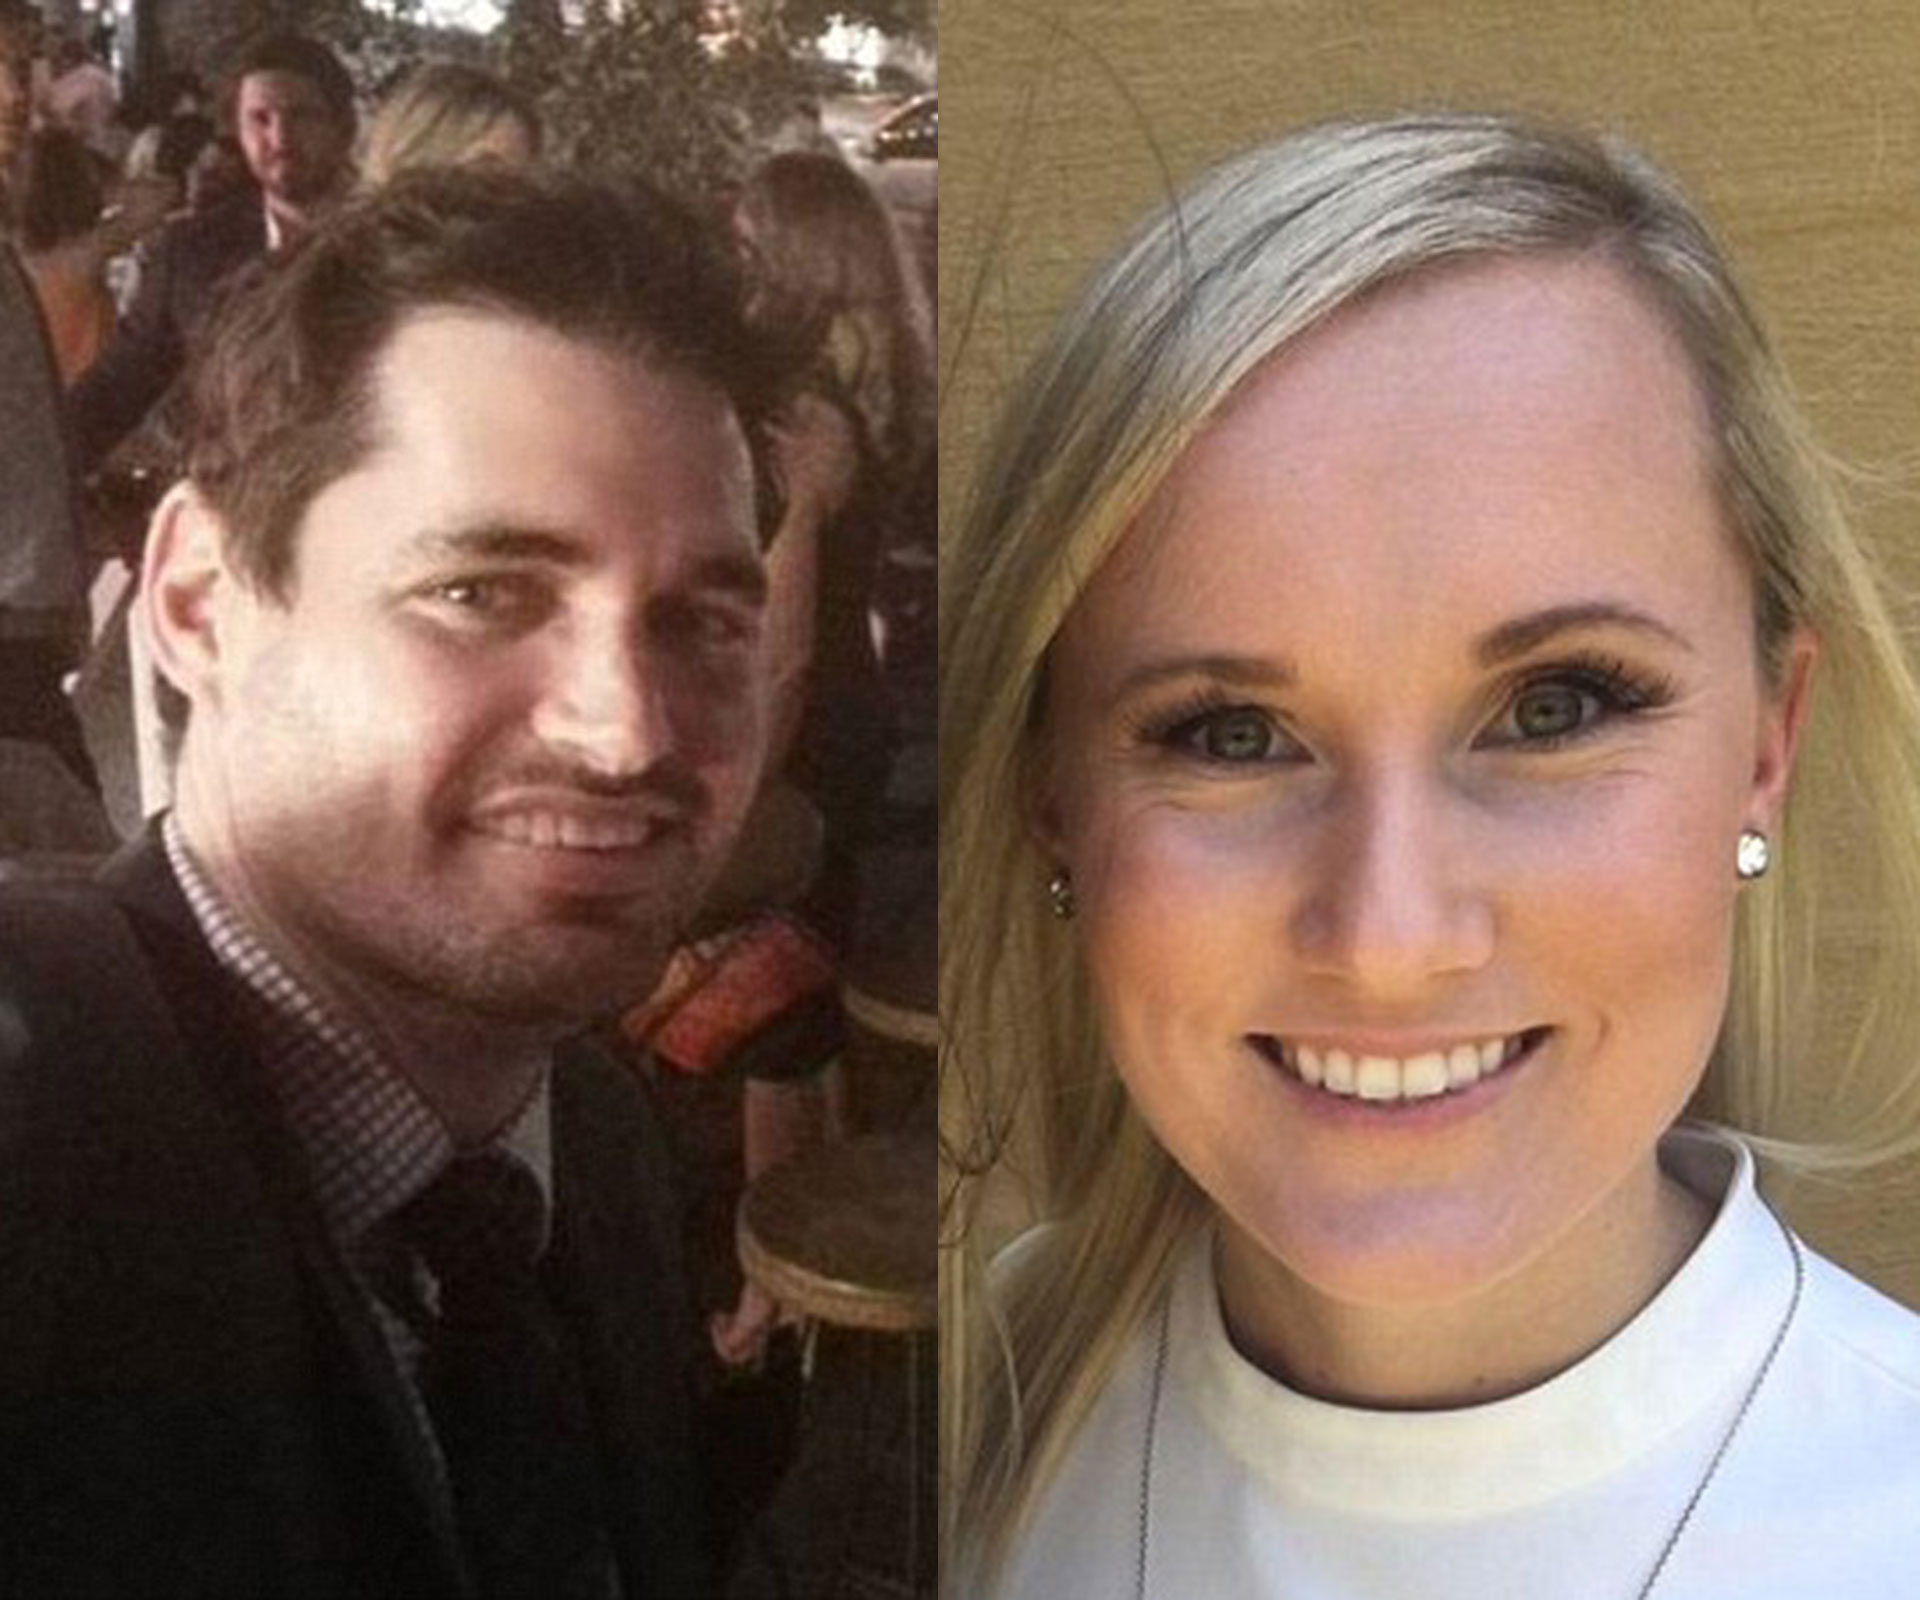 Young NSW doctor stabbed and doused in petrol by man she met on Tinder speaks out